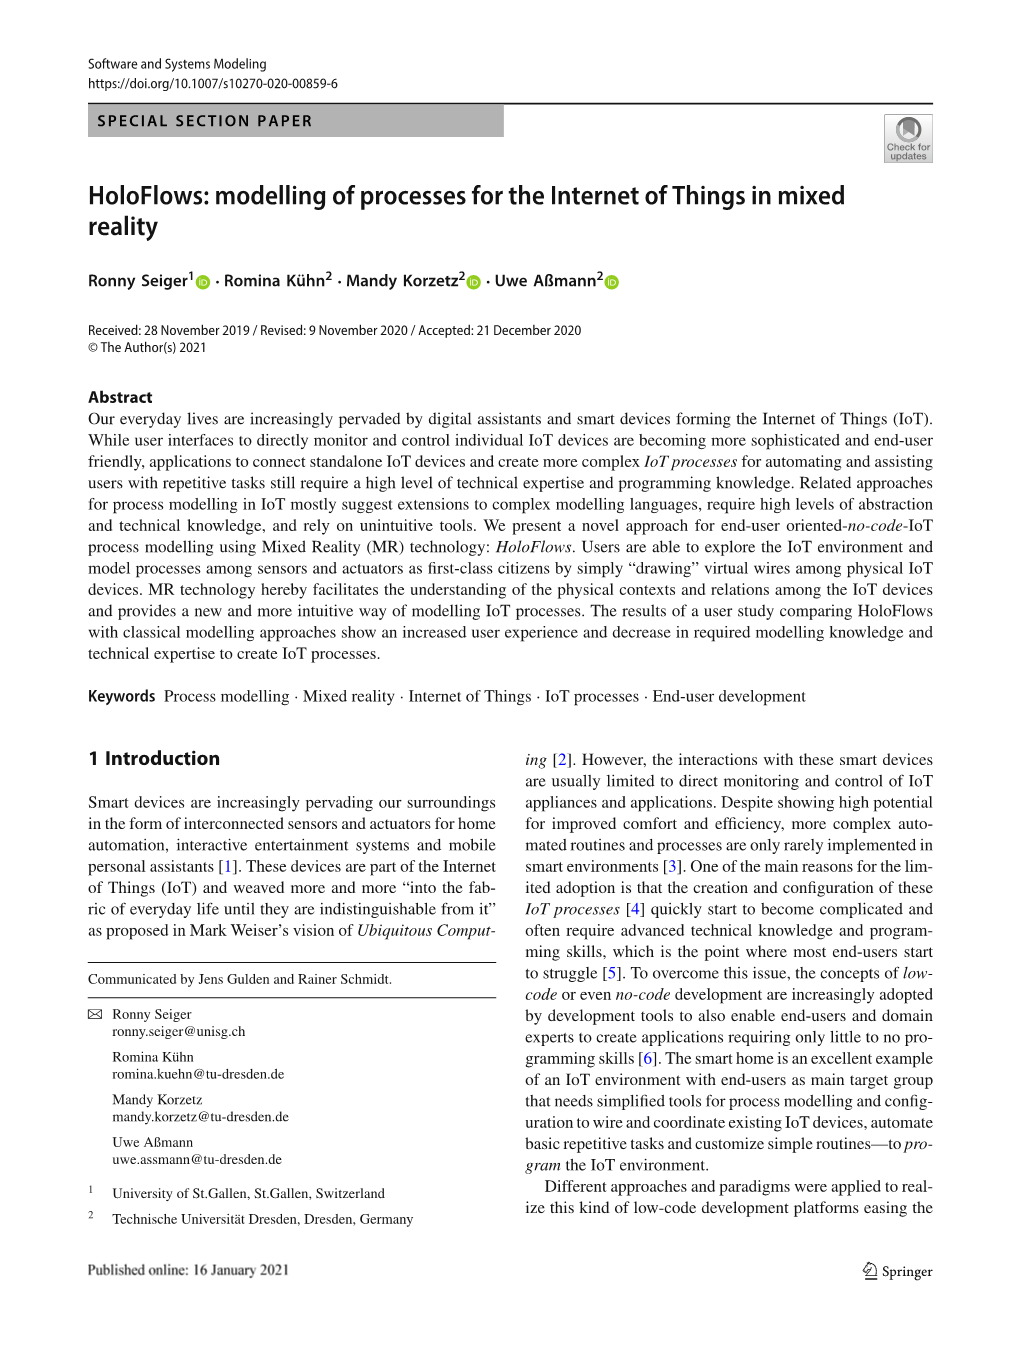 Holoflows: Modelling of Processes for the Internet of Things in Mixed Reality